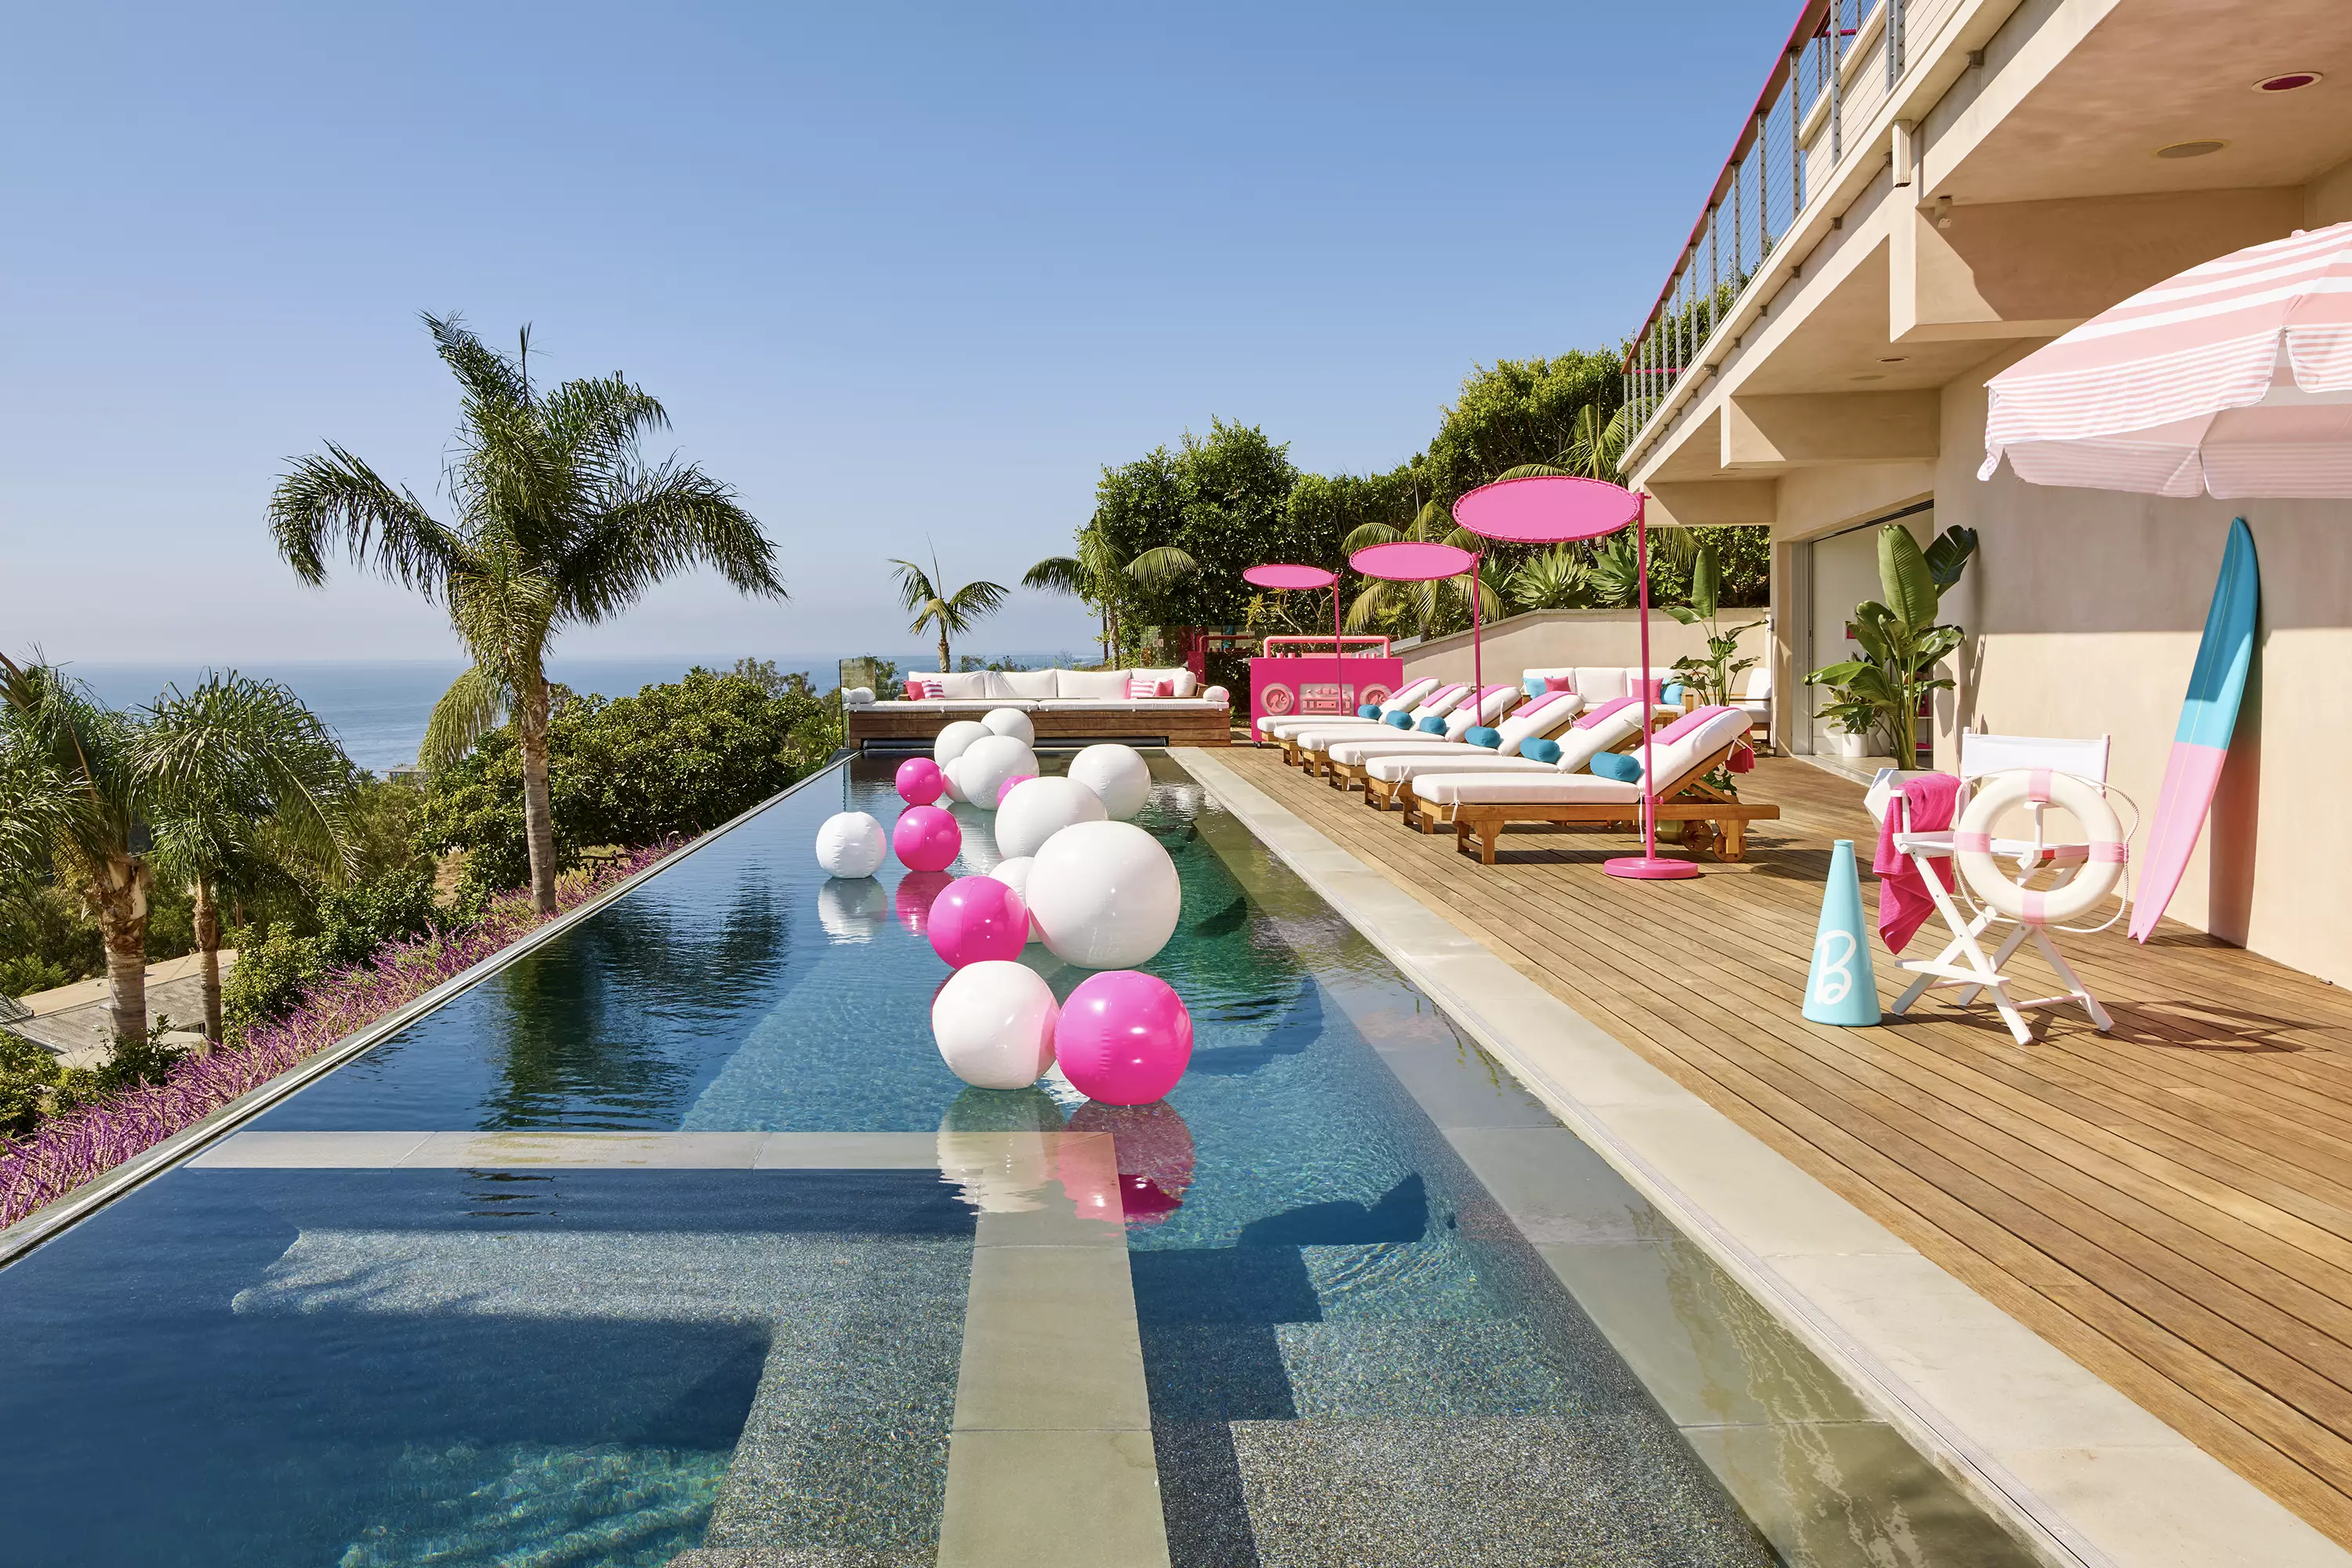 It features sun-beds to catch some rays and a sumptuous infinity pool. (